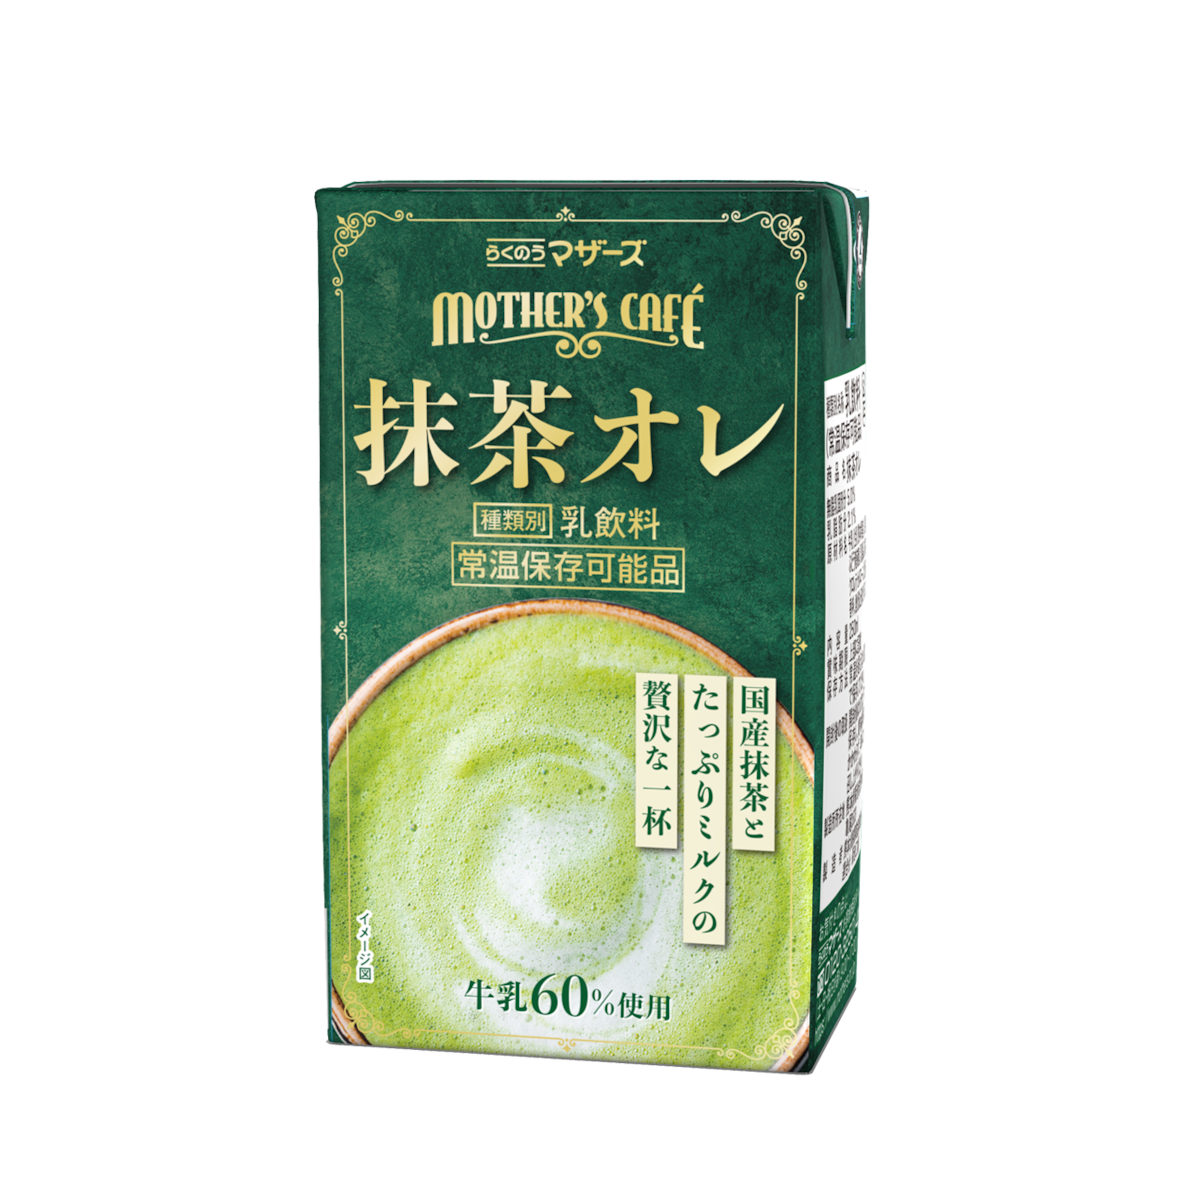 MOTHER'S Cafe 抹茶オレ250ml（24本入り）【常温便】 | らくのう